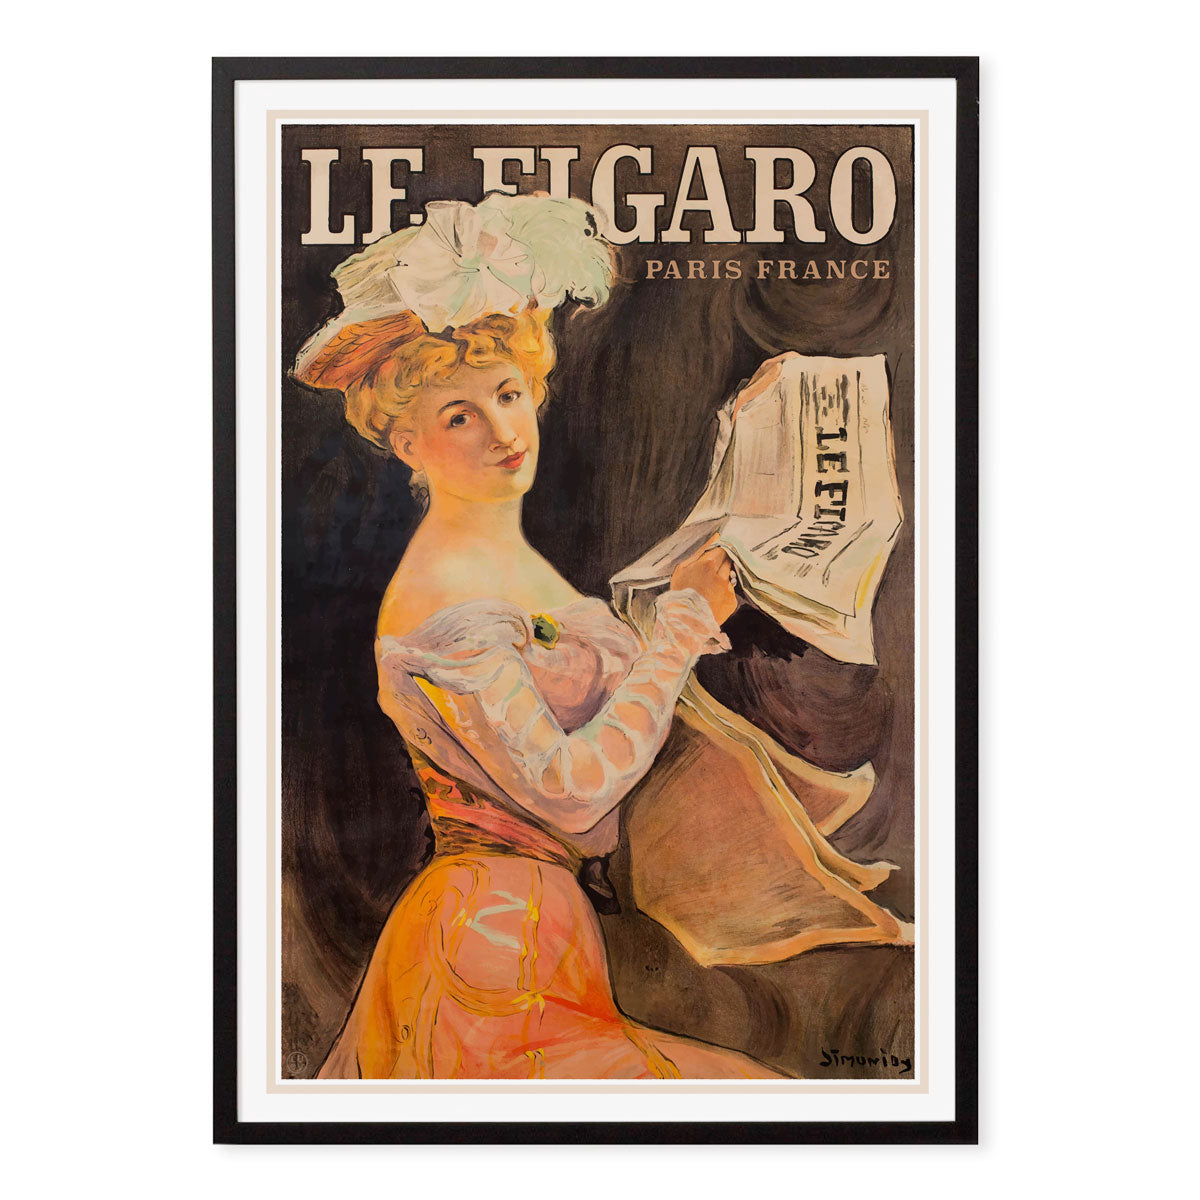 Le Figaro France reto vintage advertising poster print in black frame from Places We Luv